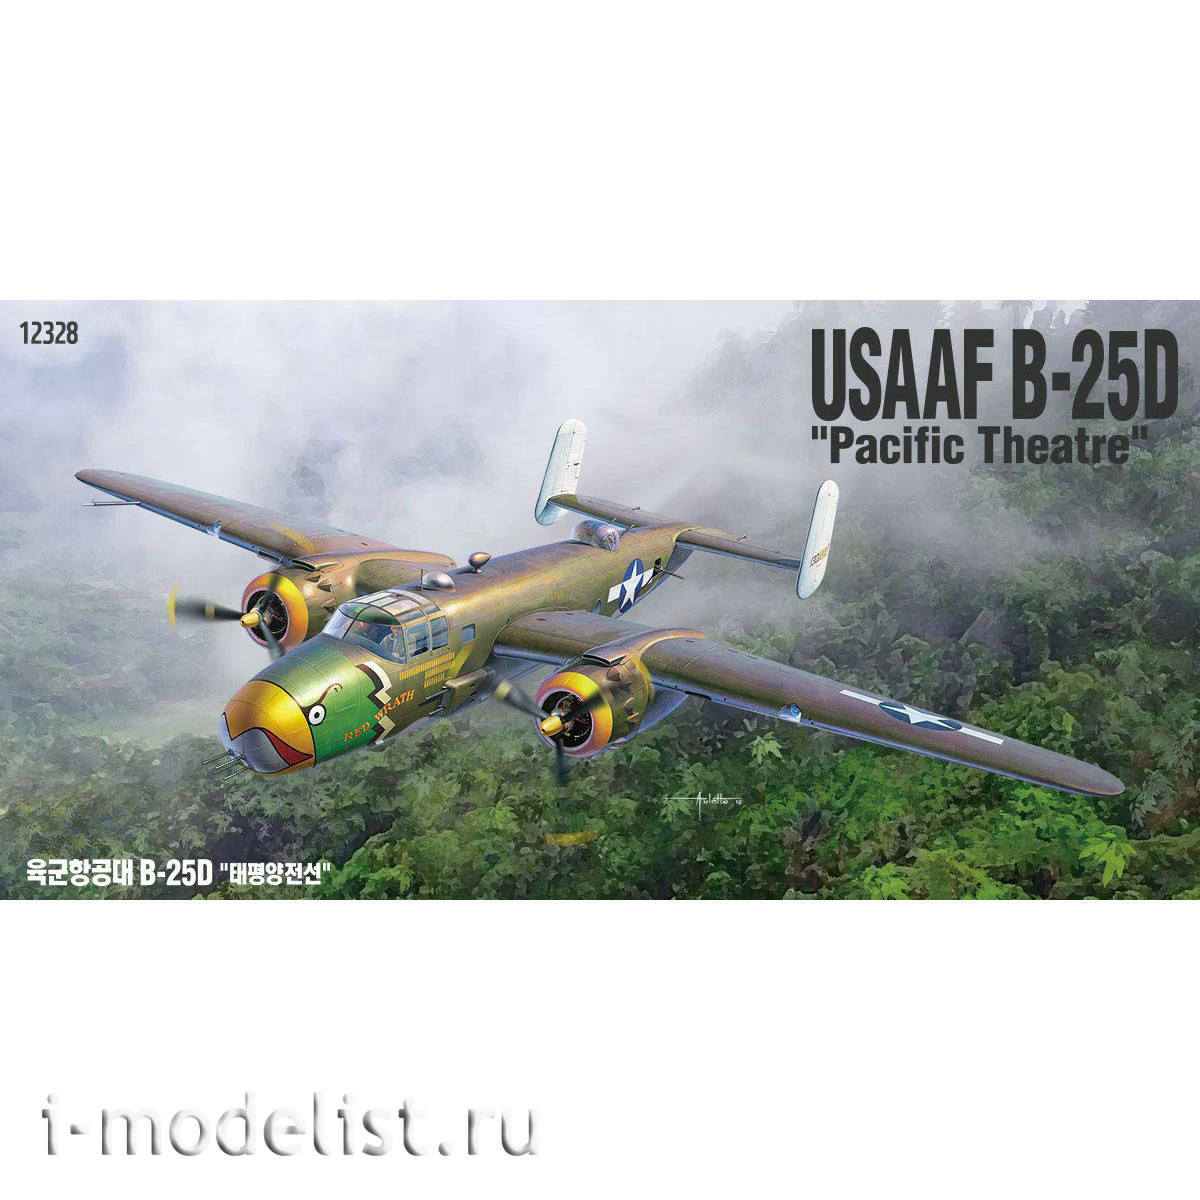 12328 Academy 1/48 Bomber B-25D Pacific Theatre